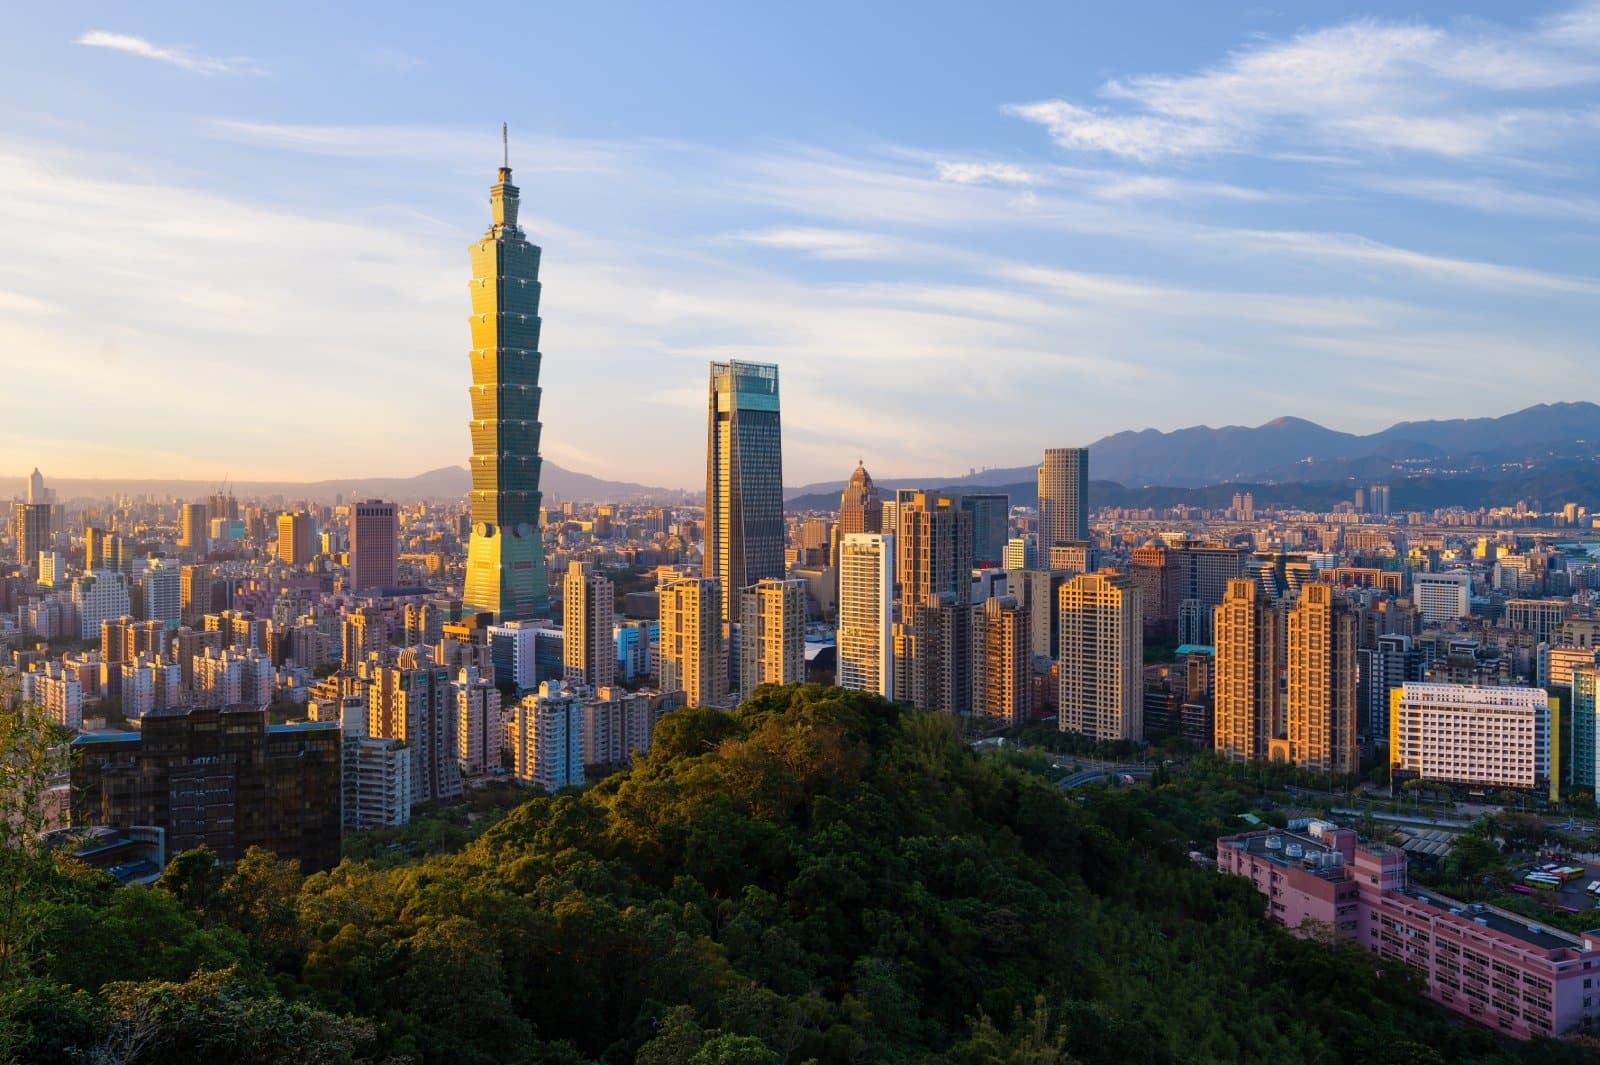 <p><span>Taiwan may just be one of the most underrated destinations in Asia, with sophisticated cities, an incredible food culture, and stunning natural sights. Since 2018 Taiwan has offered the Employment Gold Card, which allows foreigners to live and work there. </span></p><p><b>Cost of application:</b><span> 100-300 USD, depending on citizenship and visa duration</span></p><p><b>Income requirement:</b><span> 5,700 USD per month</span></p><p><b>Visa duration: </b><span>1 to 3 years</span></p>